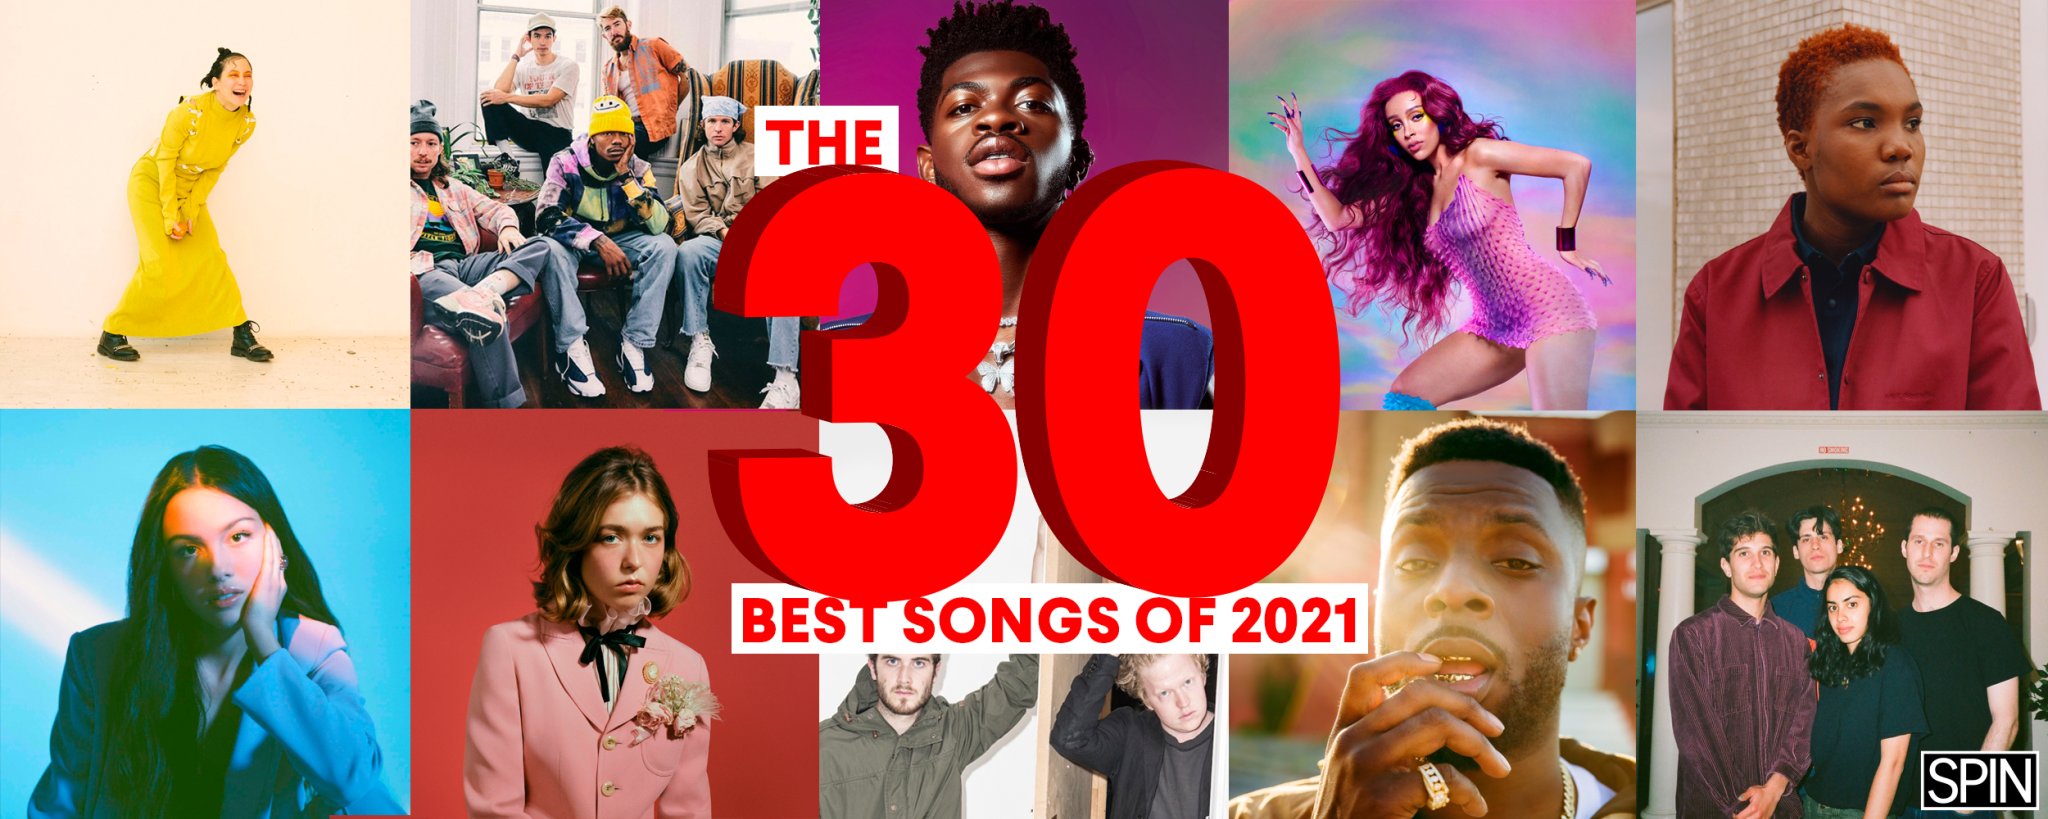 The 30 Best Songs of 2021 - SPIN